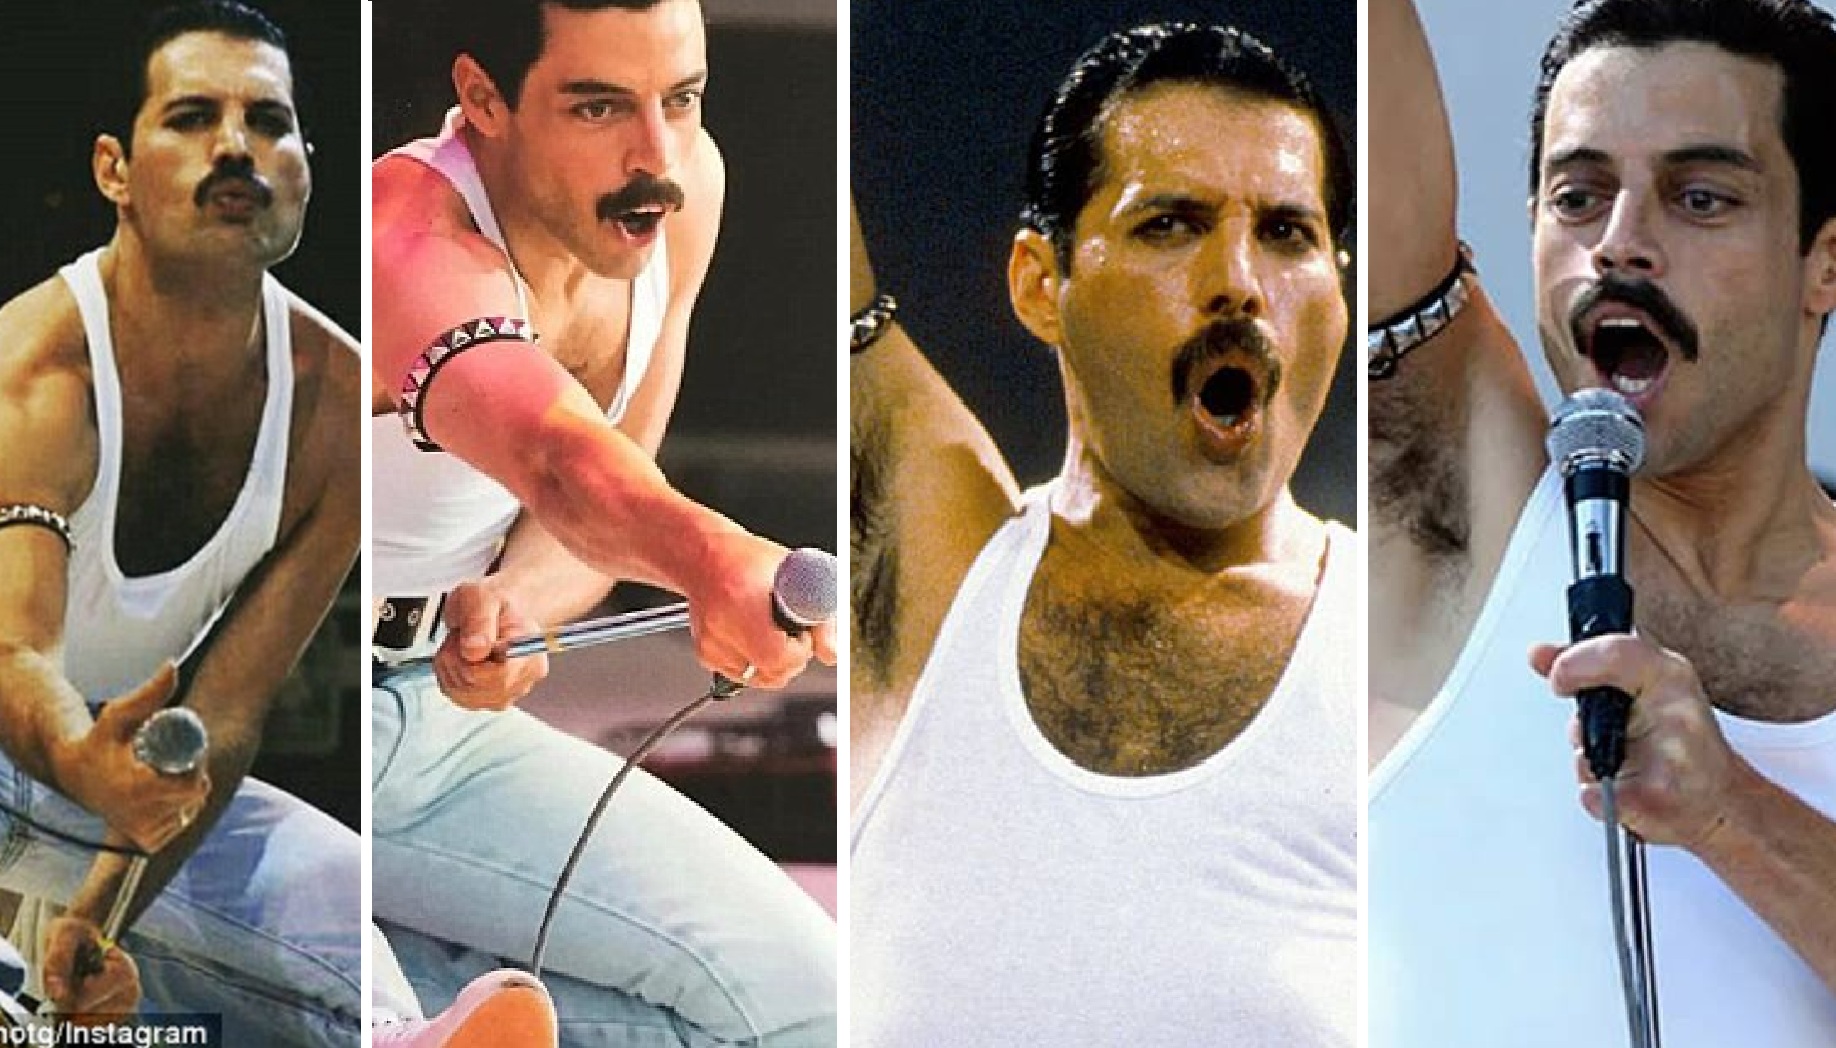 Rami Malek’s Recreation of Freddie Mercury’s Live Aid Performance Wickedly ‘Identical’ To The Original